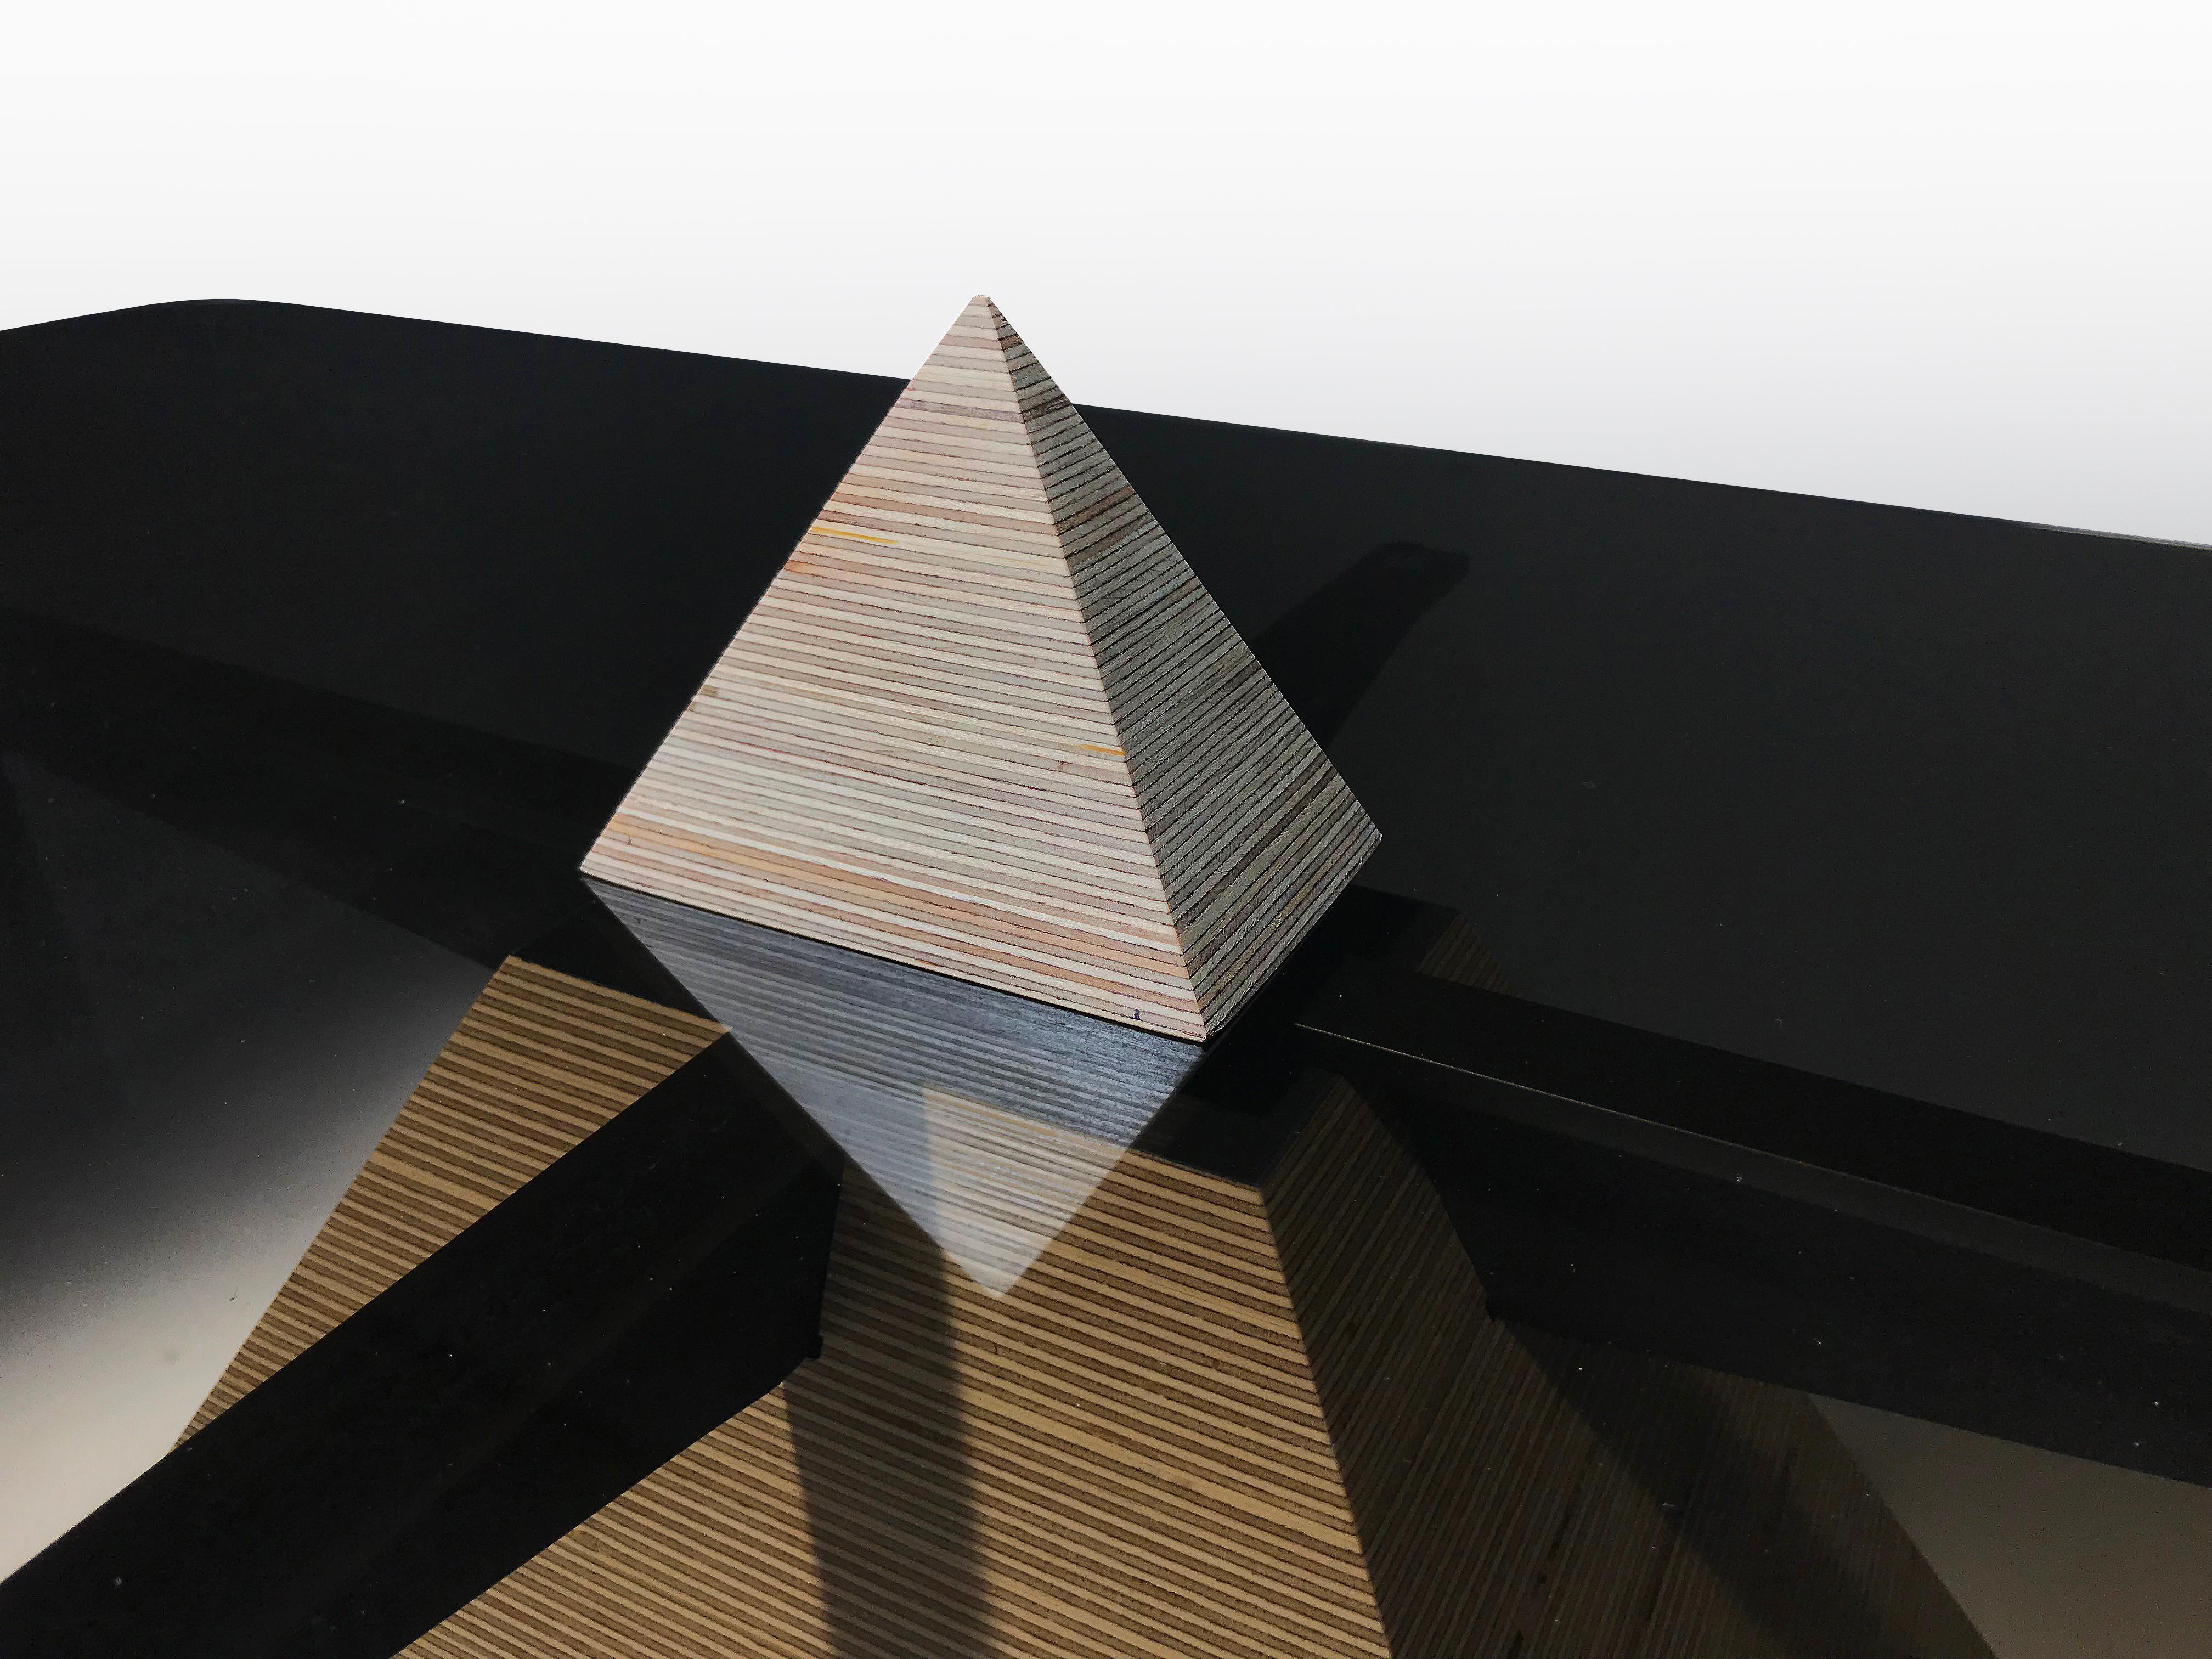 American EÆ Pyramid Halo Coffee Table in Laminated Finland Birch Plywood and Black Glass For Sale